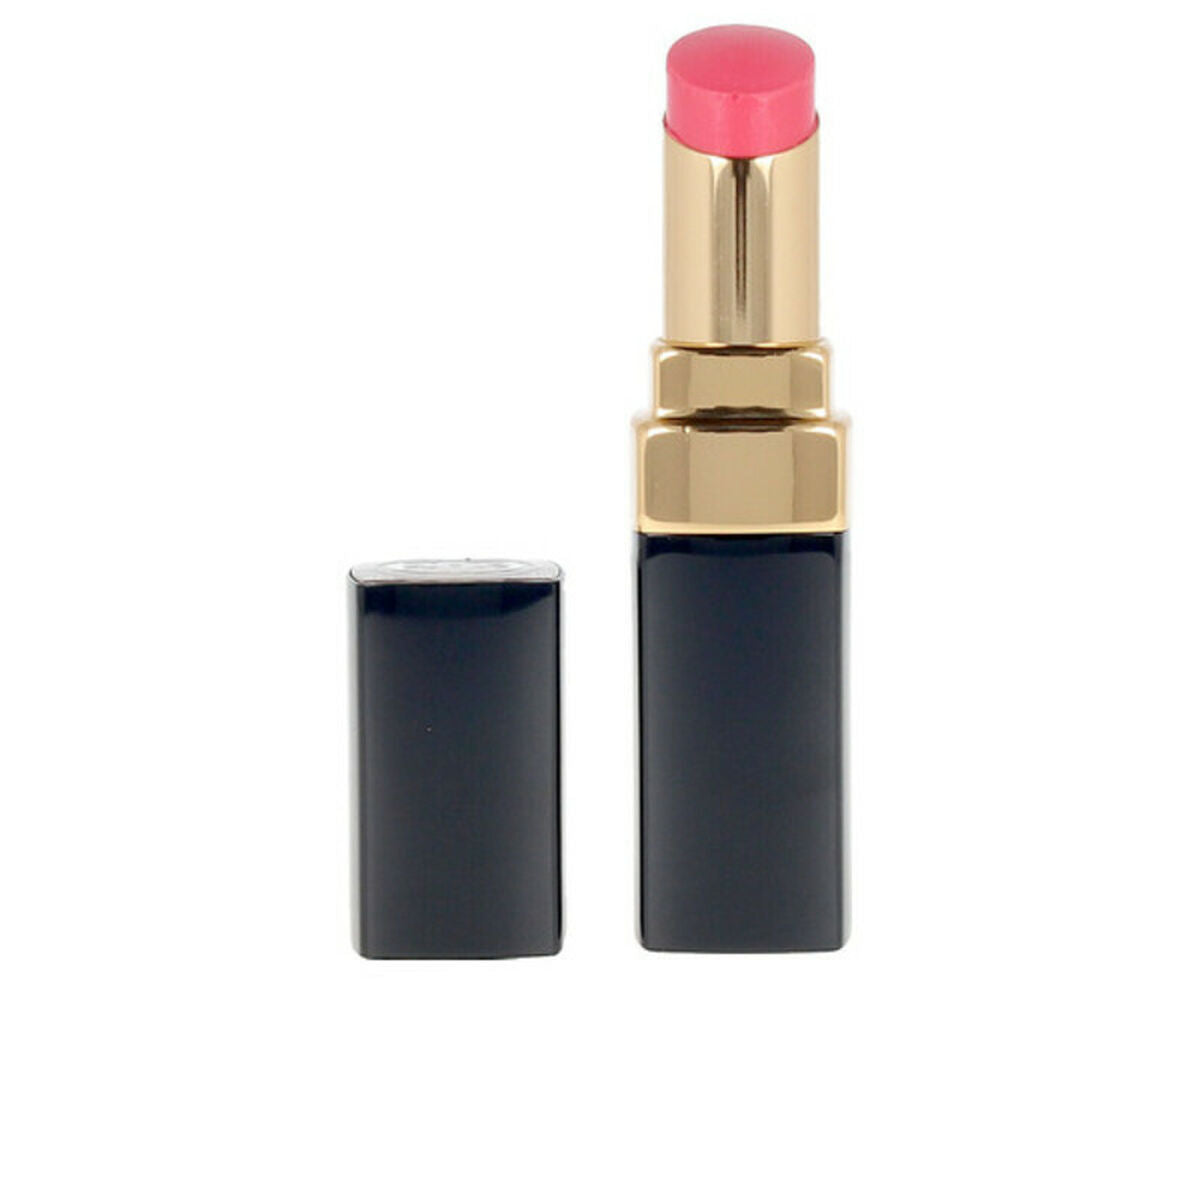 Lip balm Chanel Rouge Coco 3 g | Chanel | Aylal Beauty